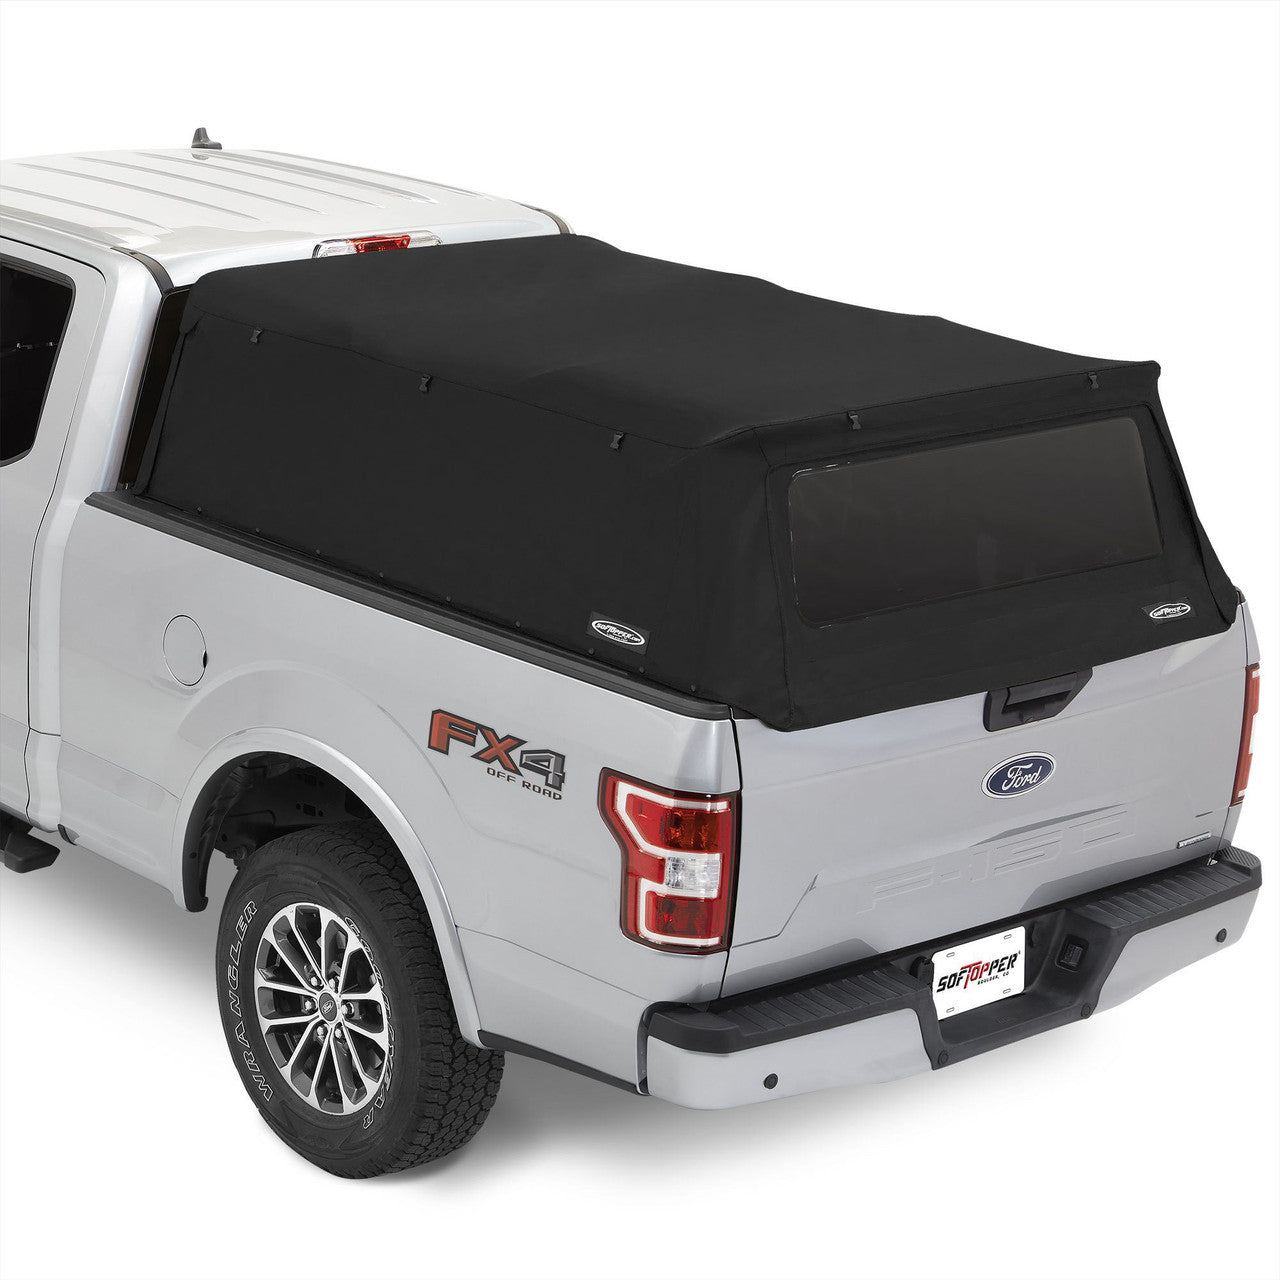 Image showing SofTopper Mounted on Ford F-150